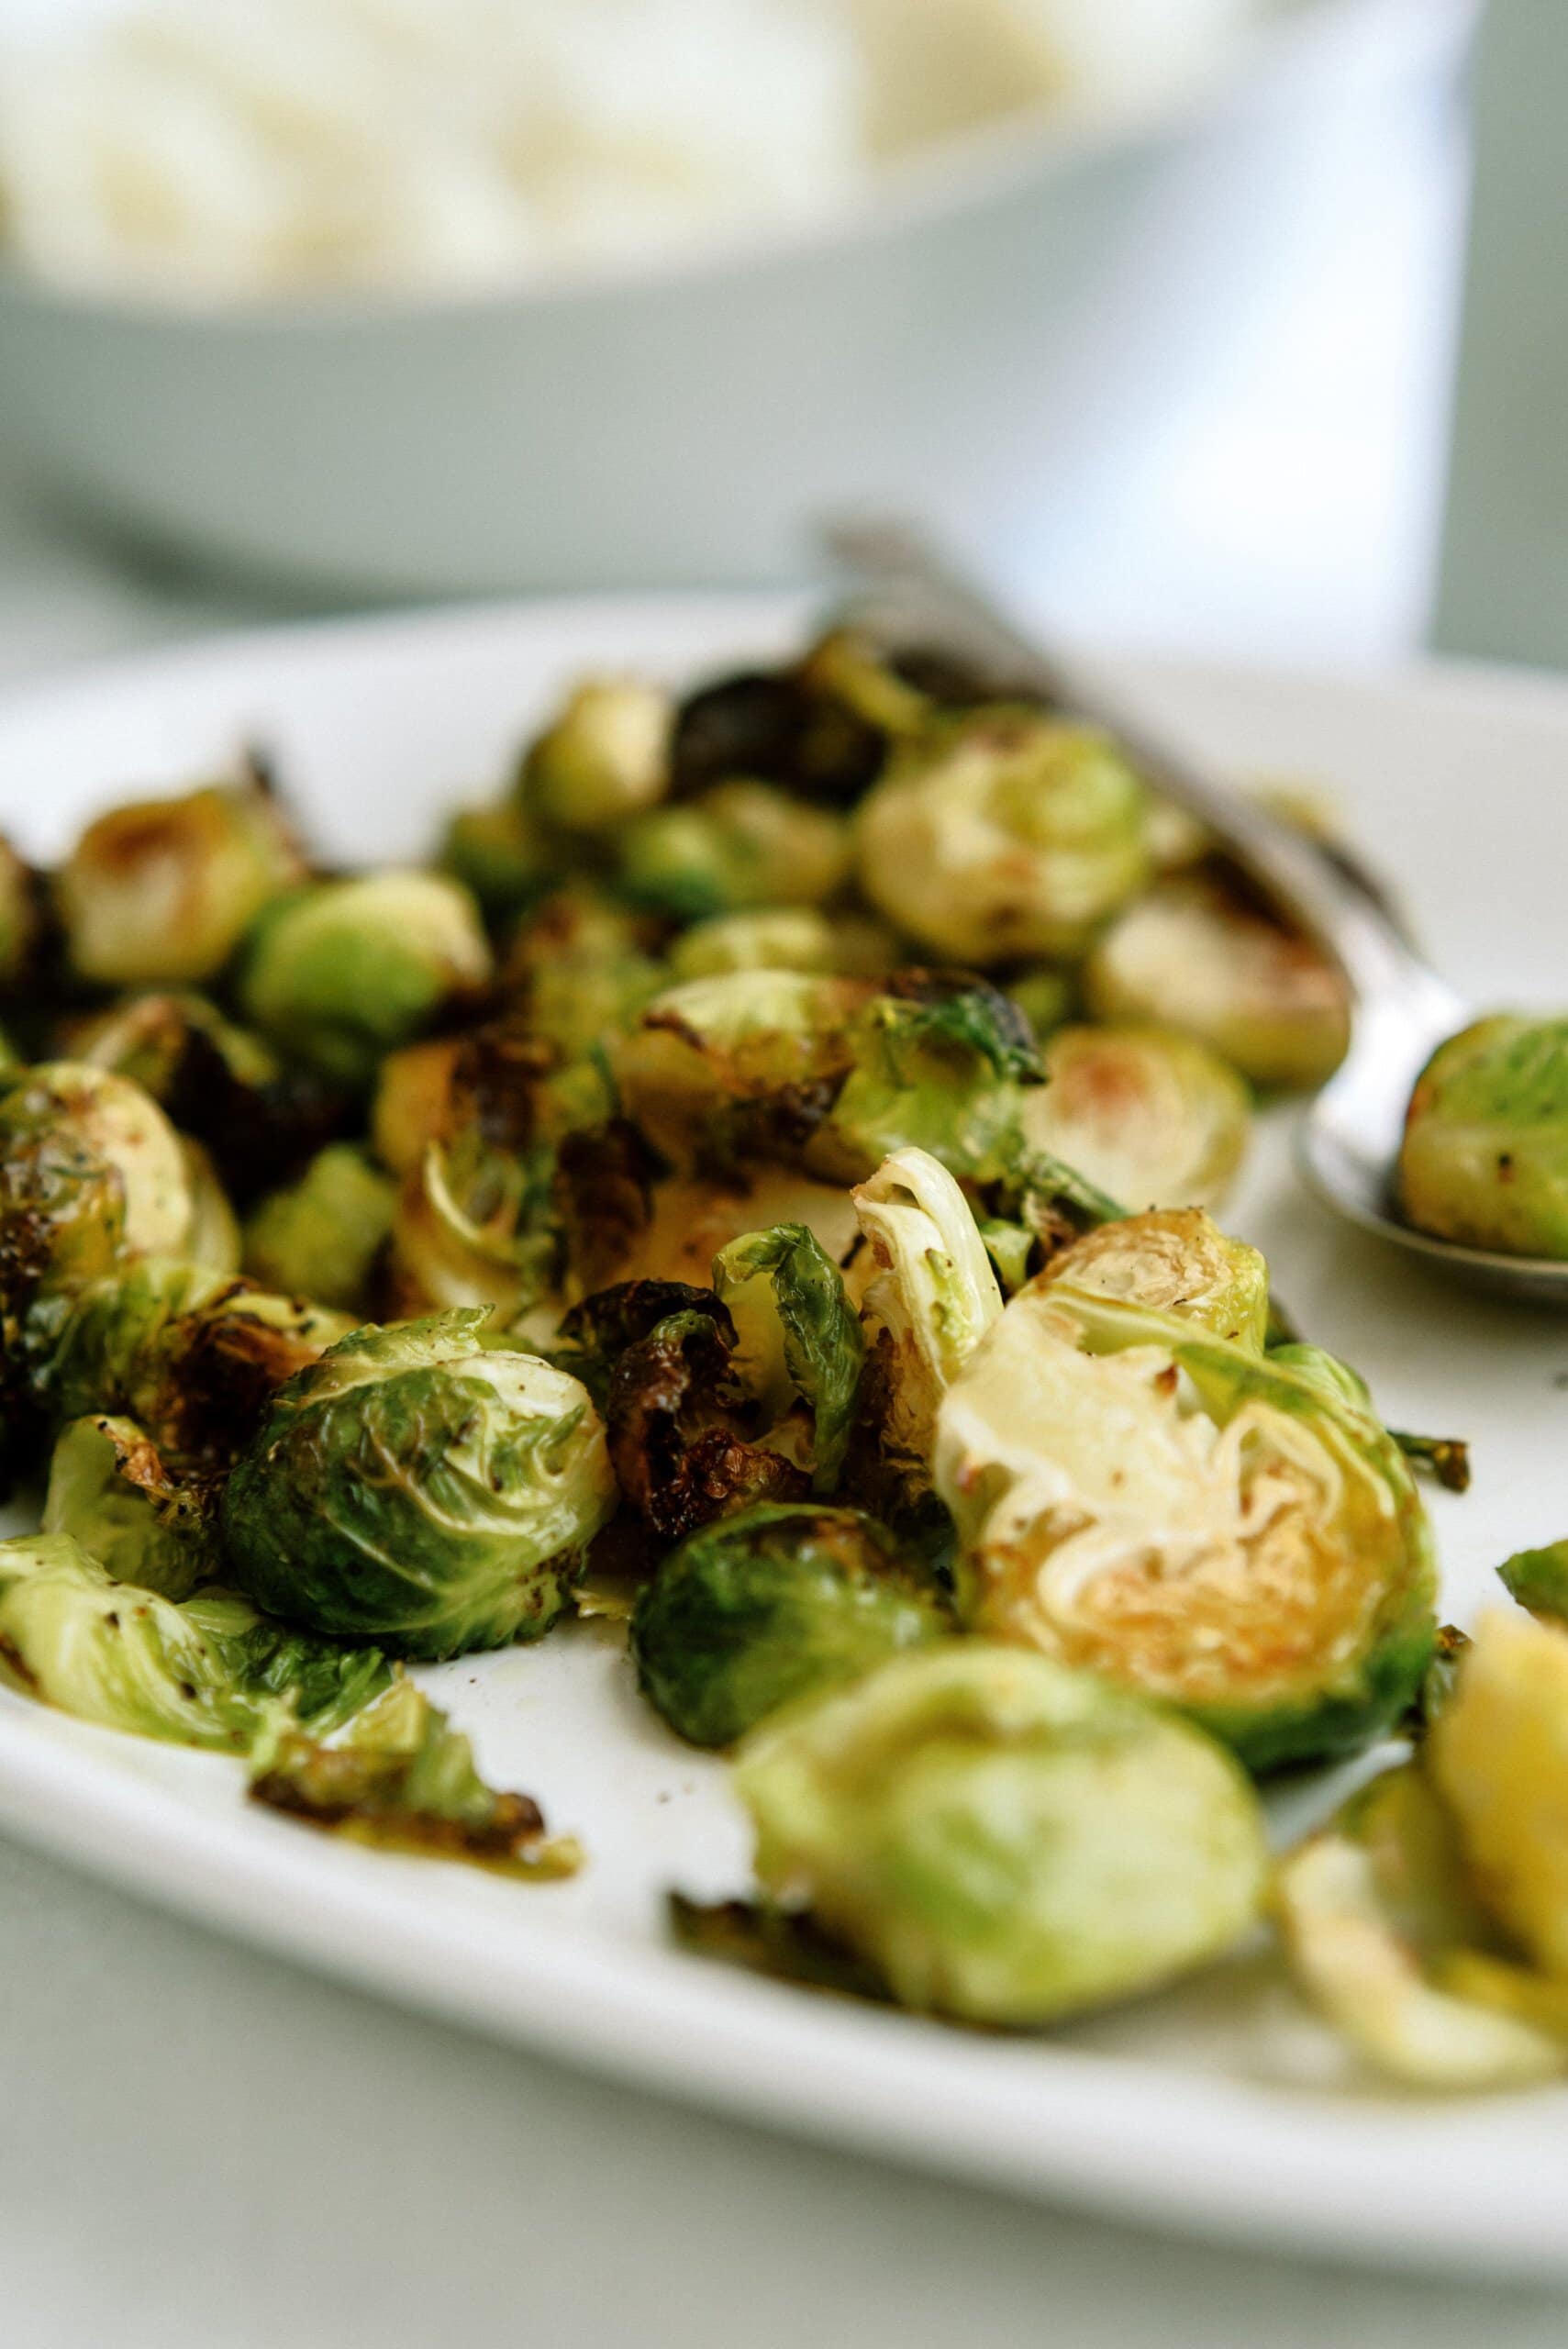 roasted brussel sprouts on a plate